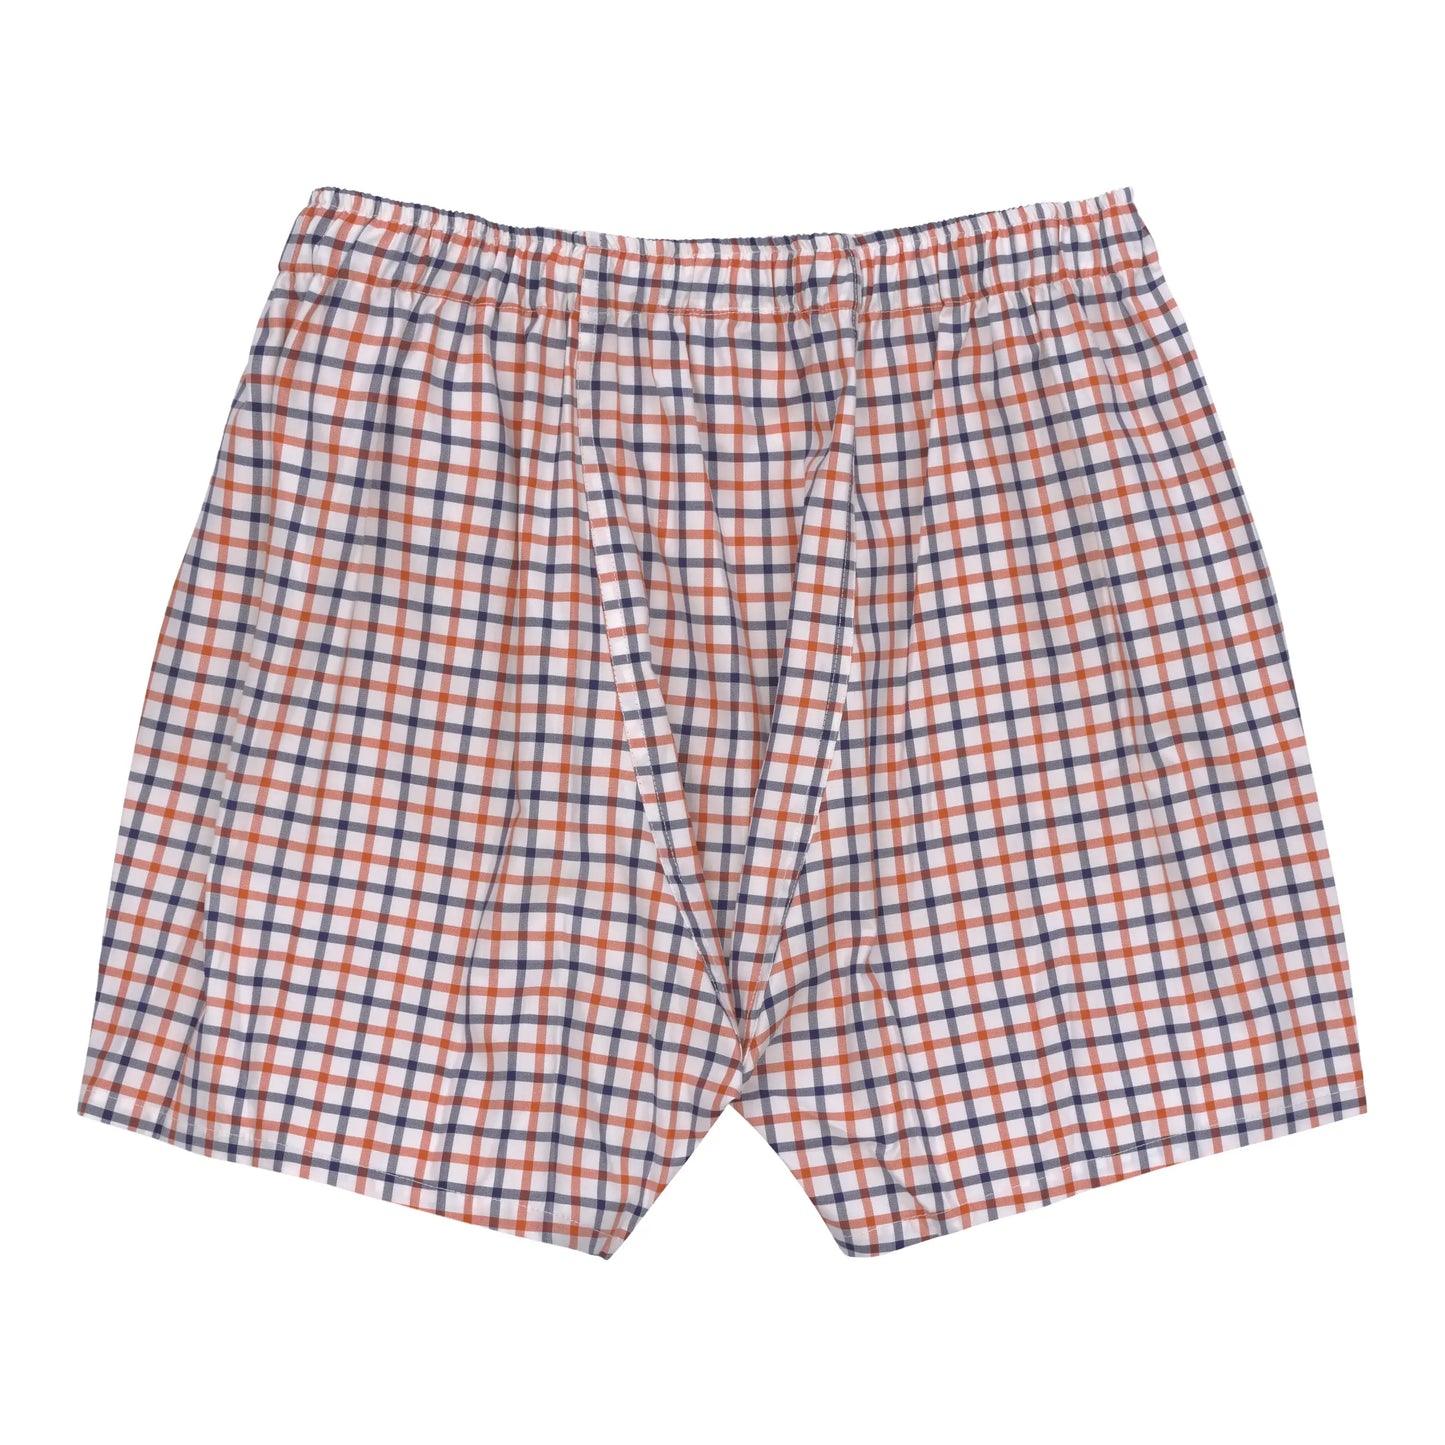 White Checked Boxer Shorts in Blue and Orange